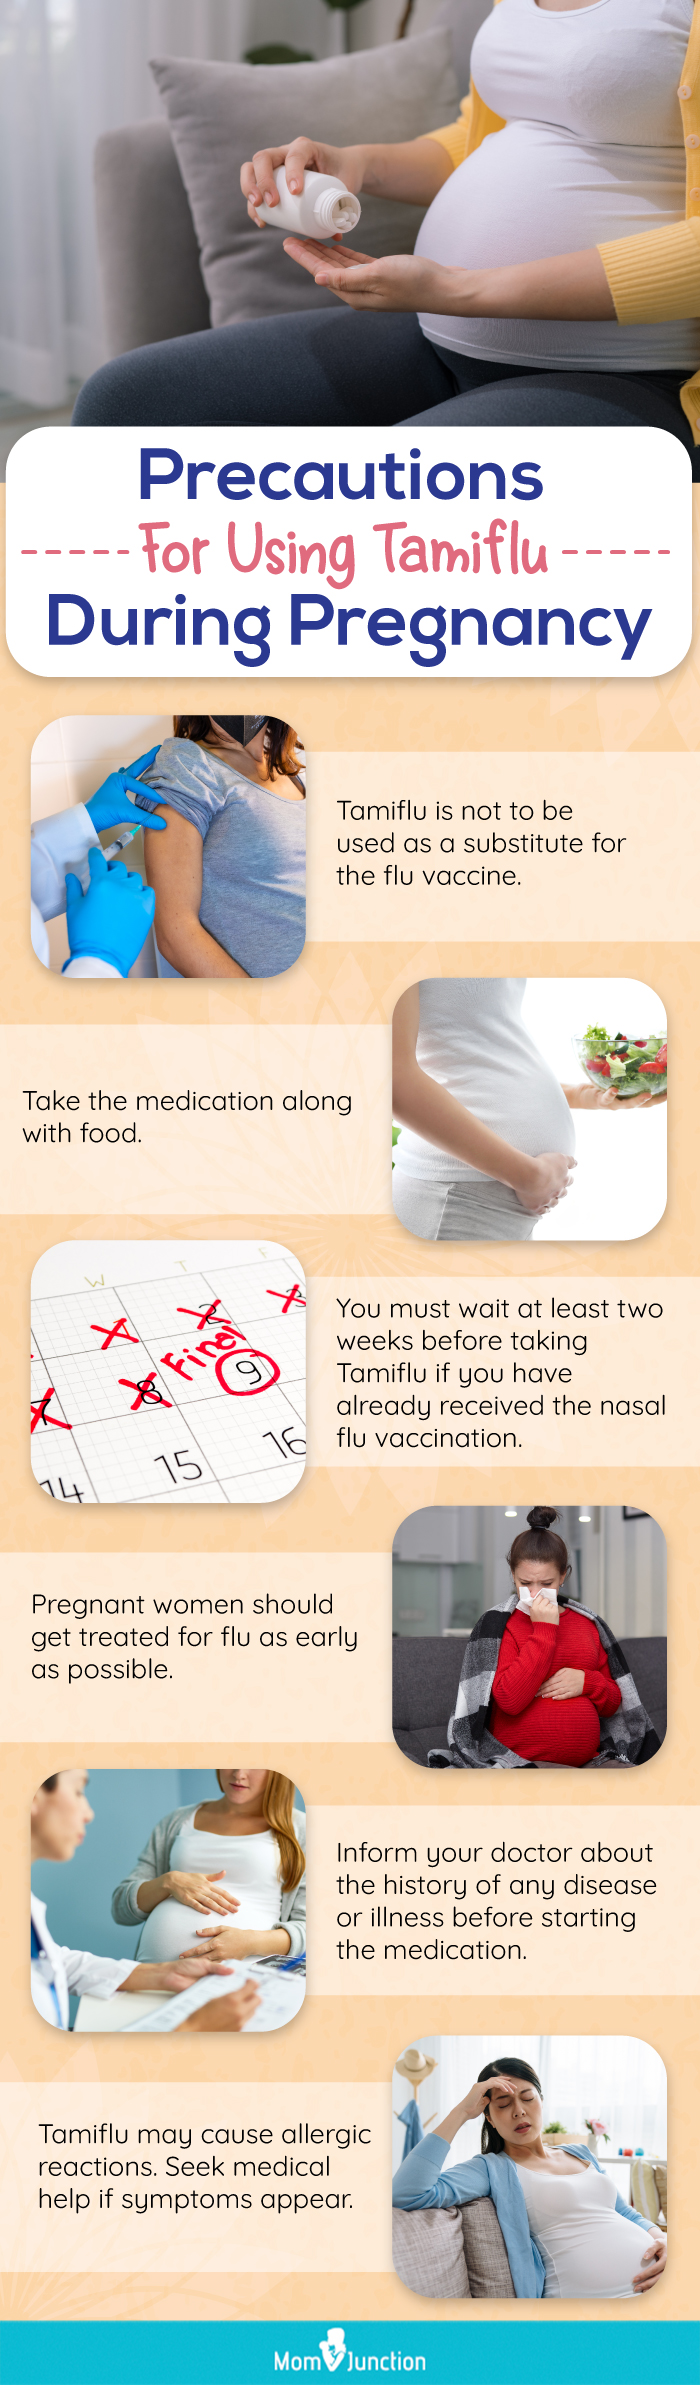 precautions for using tamiflu during pregnancy (infographic)